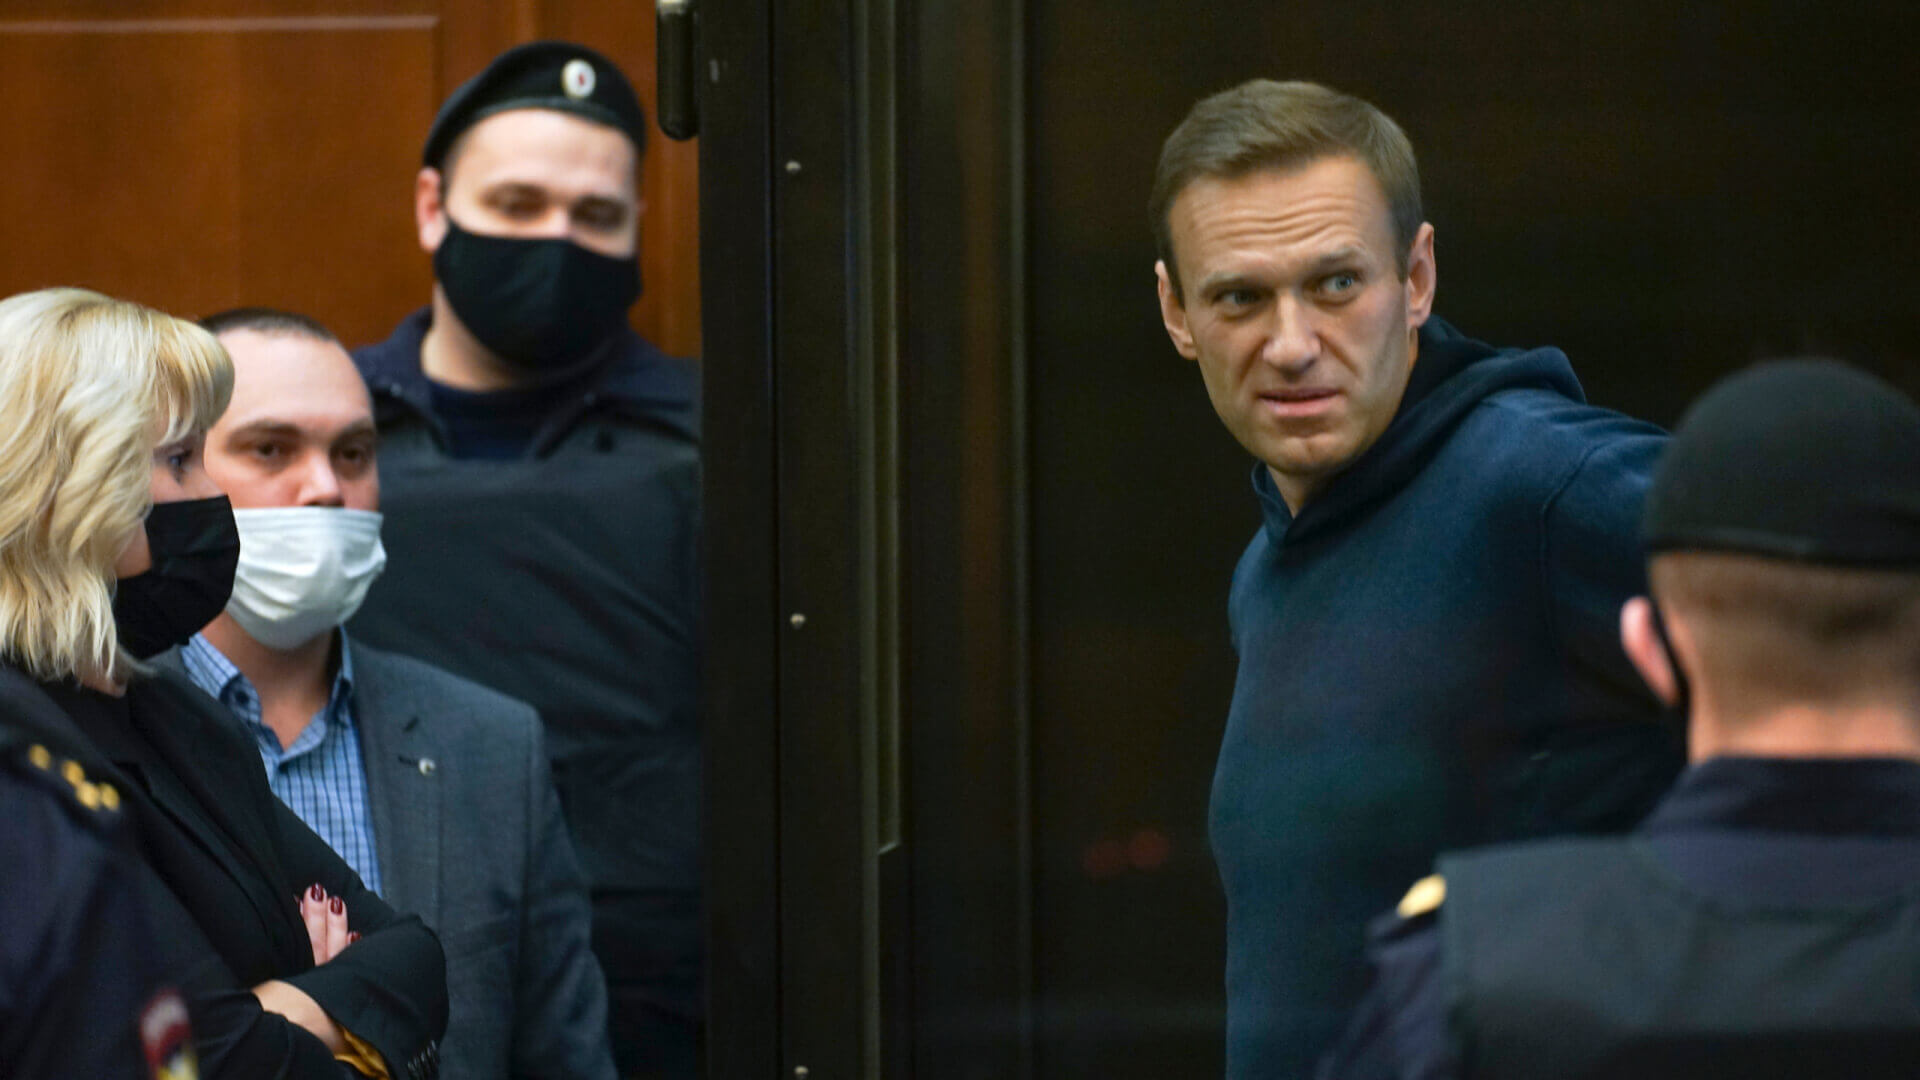 Russia Sentences Opposition Leader Navalny to Prison, Sparking Global Outrage